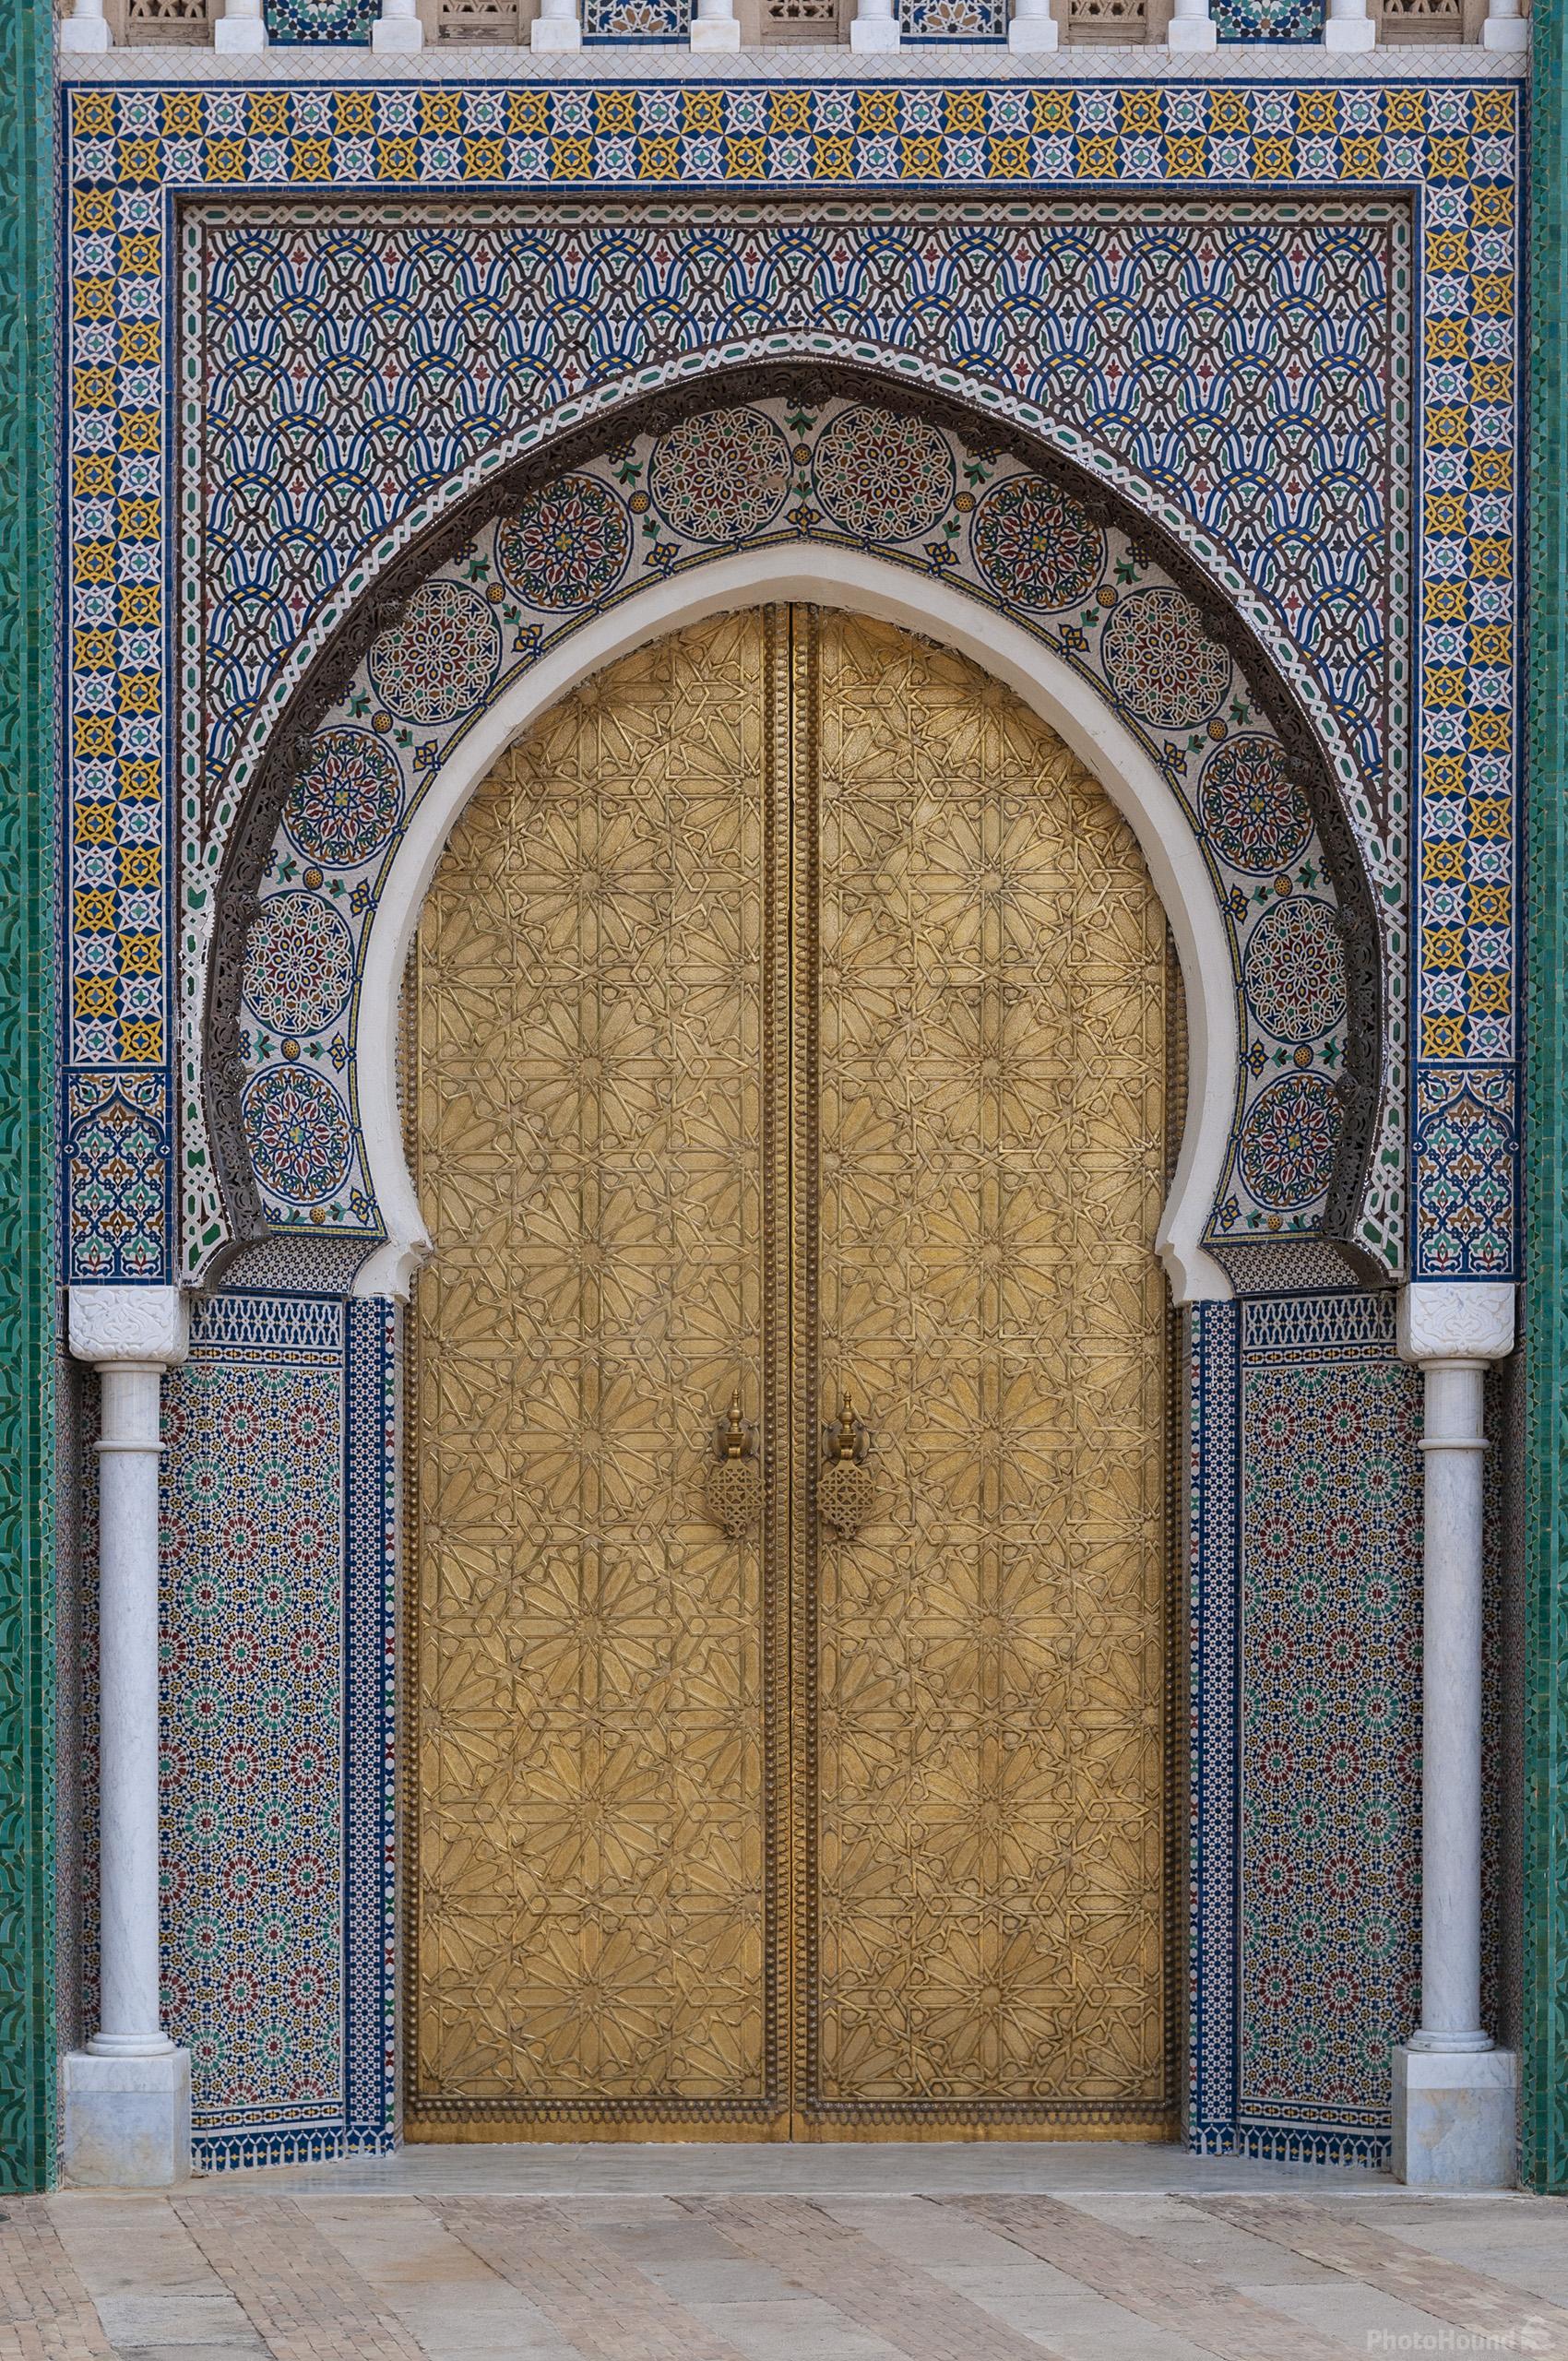 Image of Royal Palace in Fez by Luka Esenko